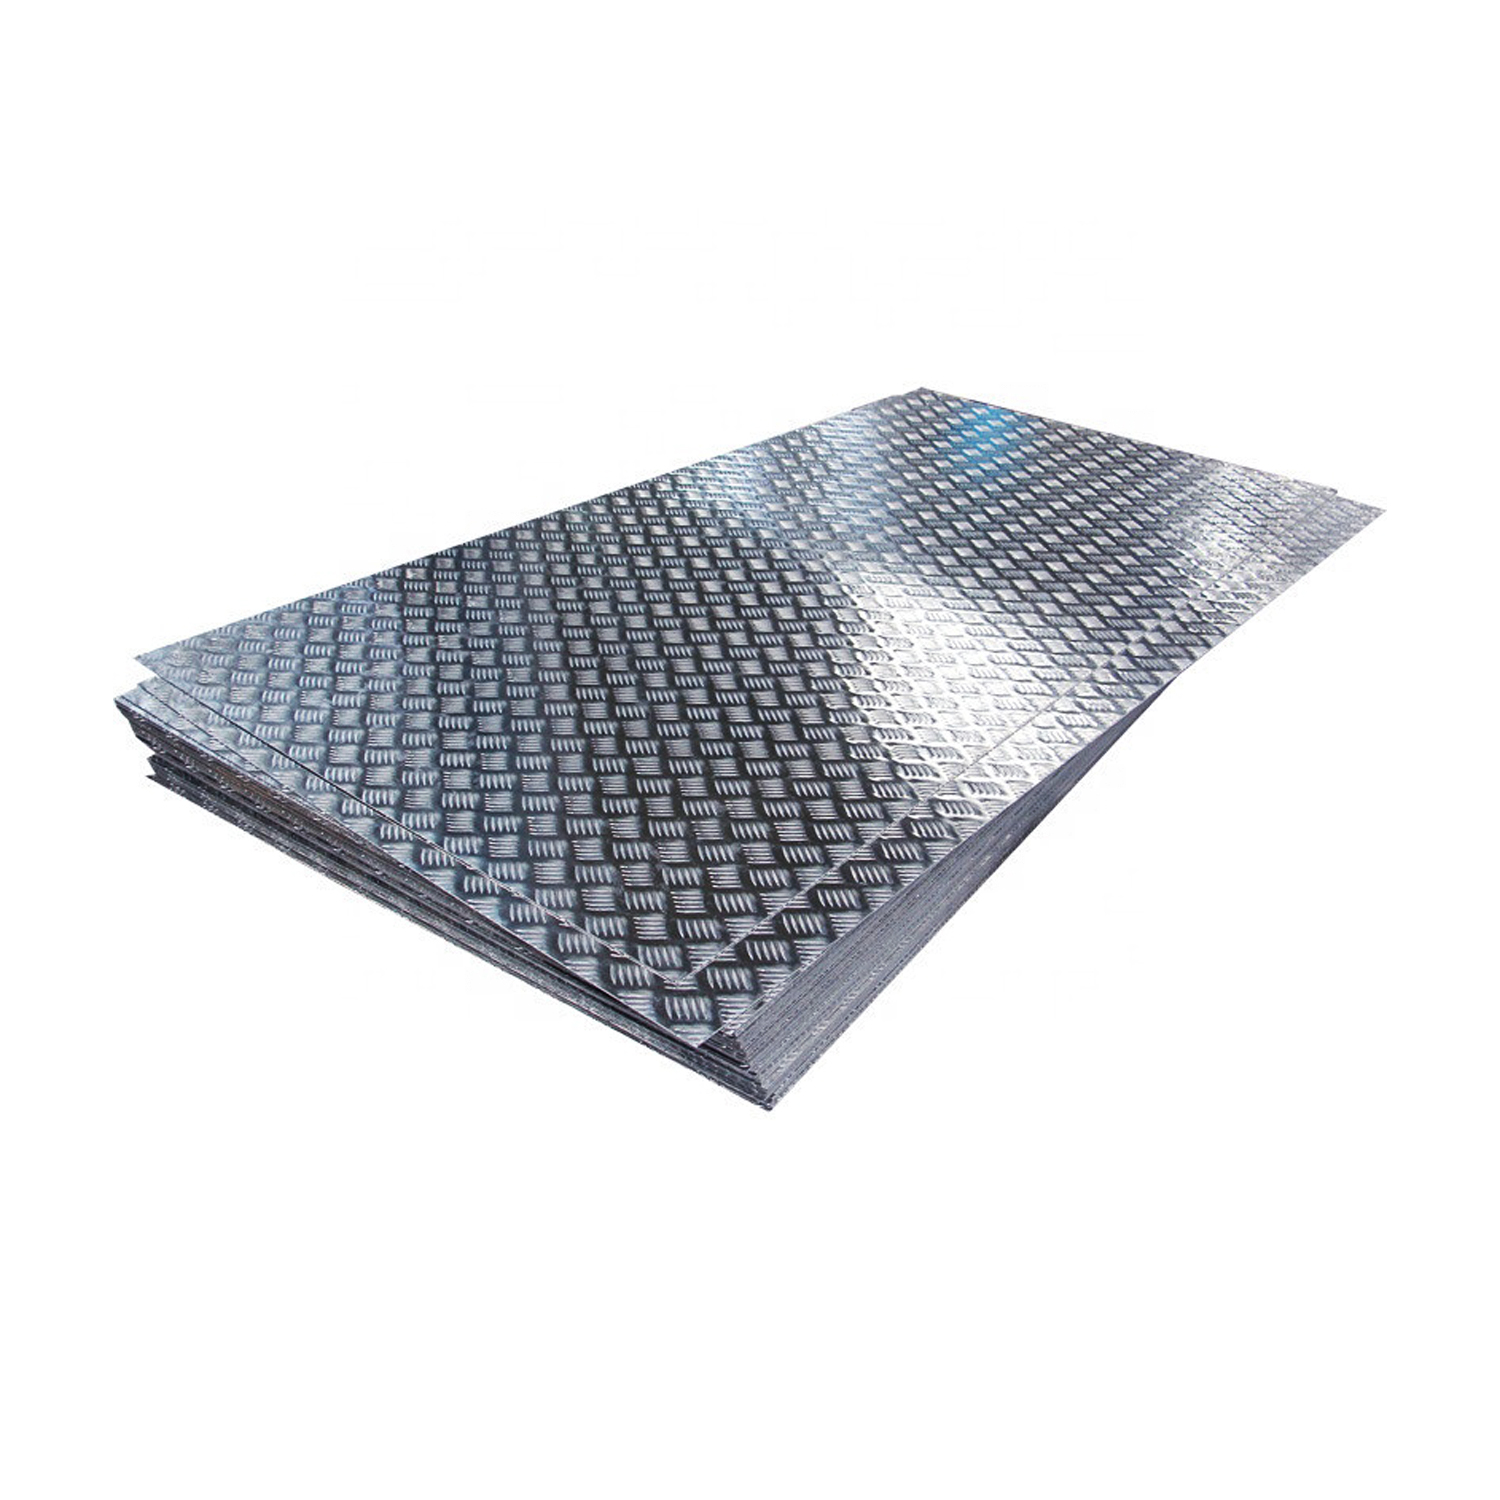 Chinese Stainless Steel Producer 201 304 316 Stainless Steel Checkered Sheet Customized